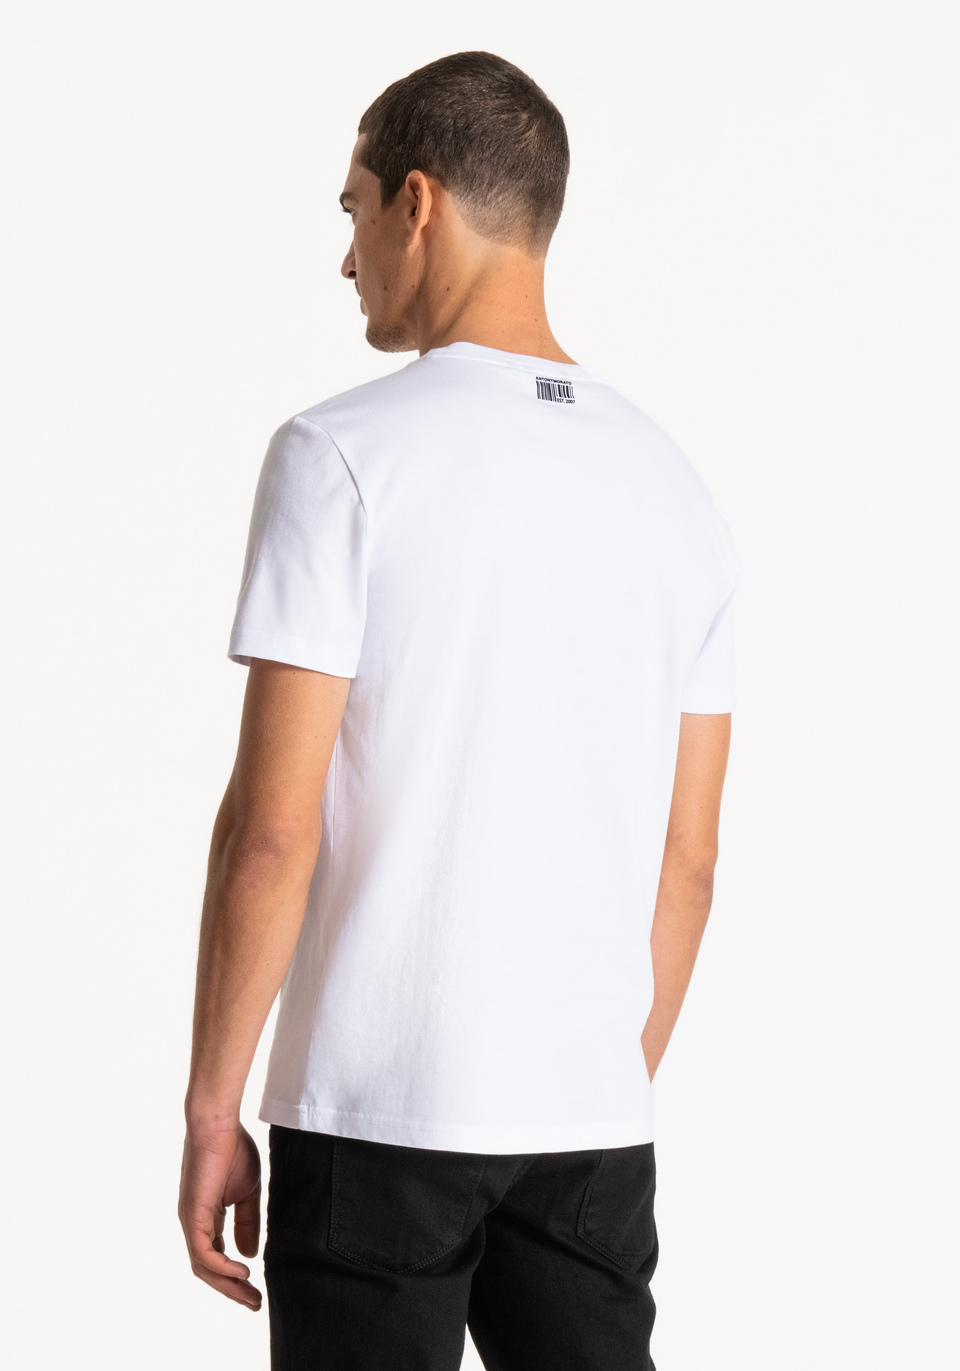 SLIM-FIT T-SHIRT IN 100% COTTON WITH A PRINT AT FRONT - Antony Morato Online Shop